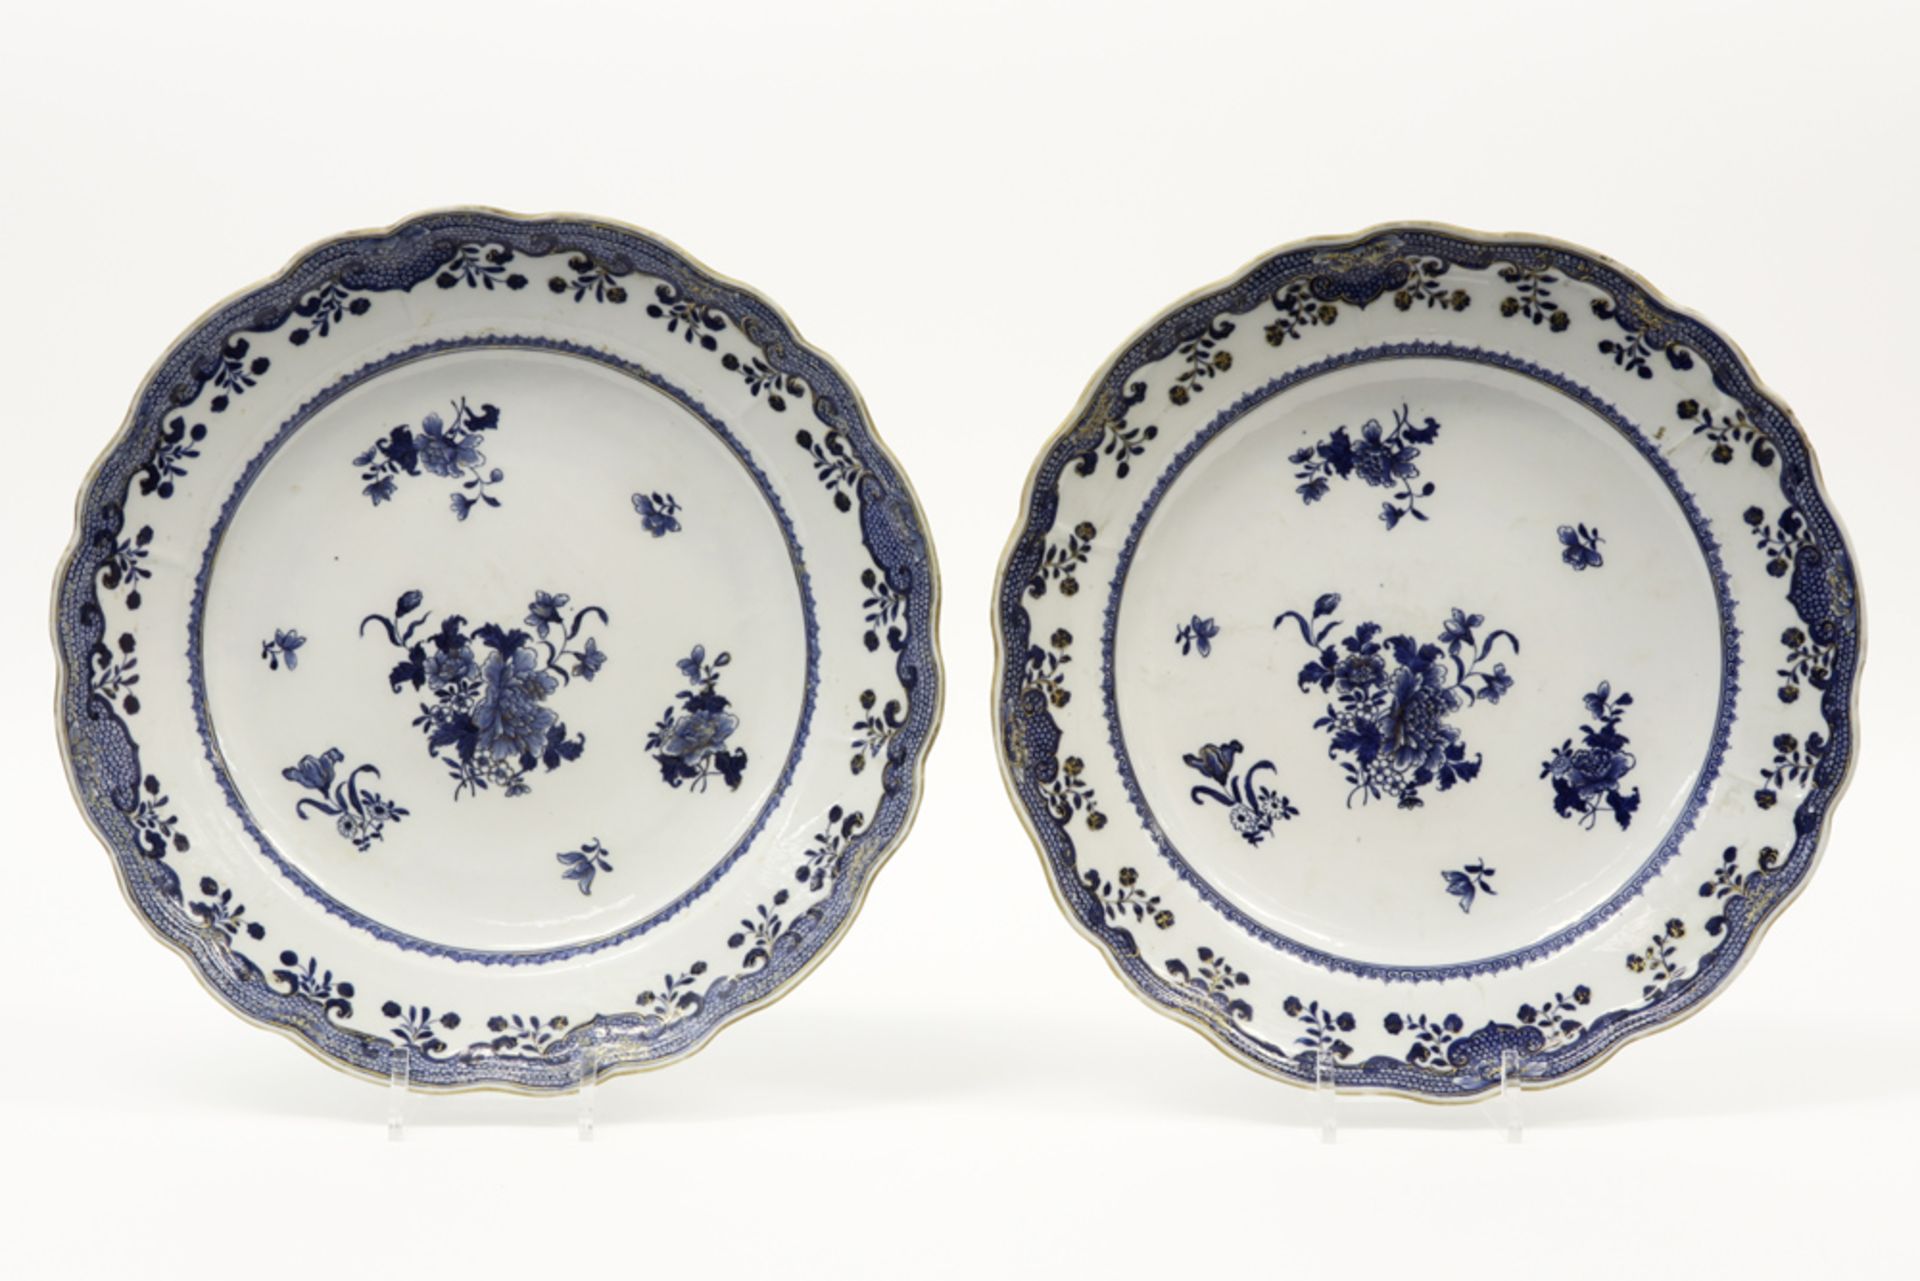 pair of quite big round 18th Cent. Chinese dishes in porcelain with a floral blue-white (with